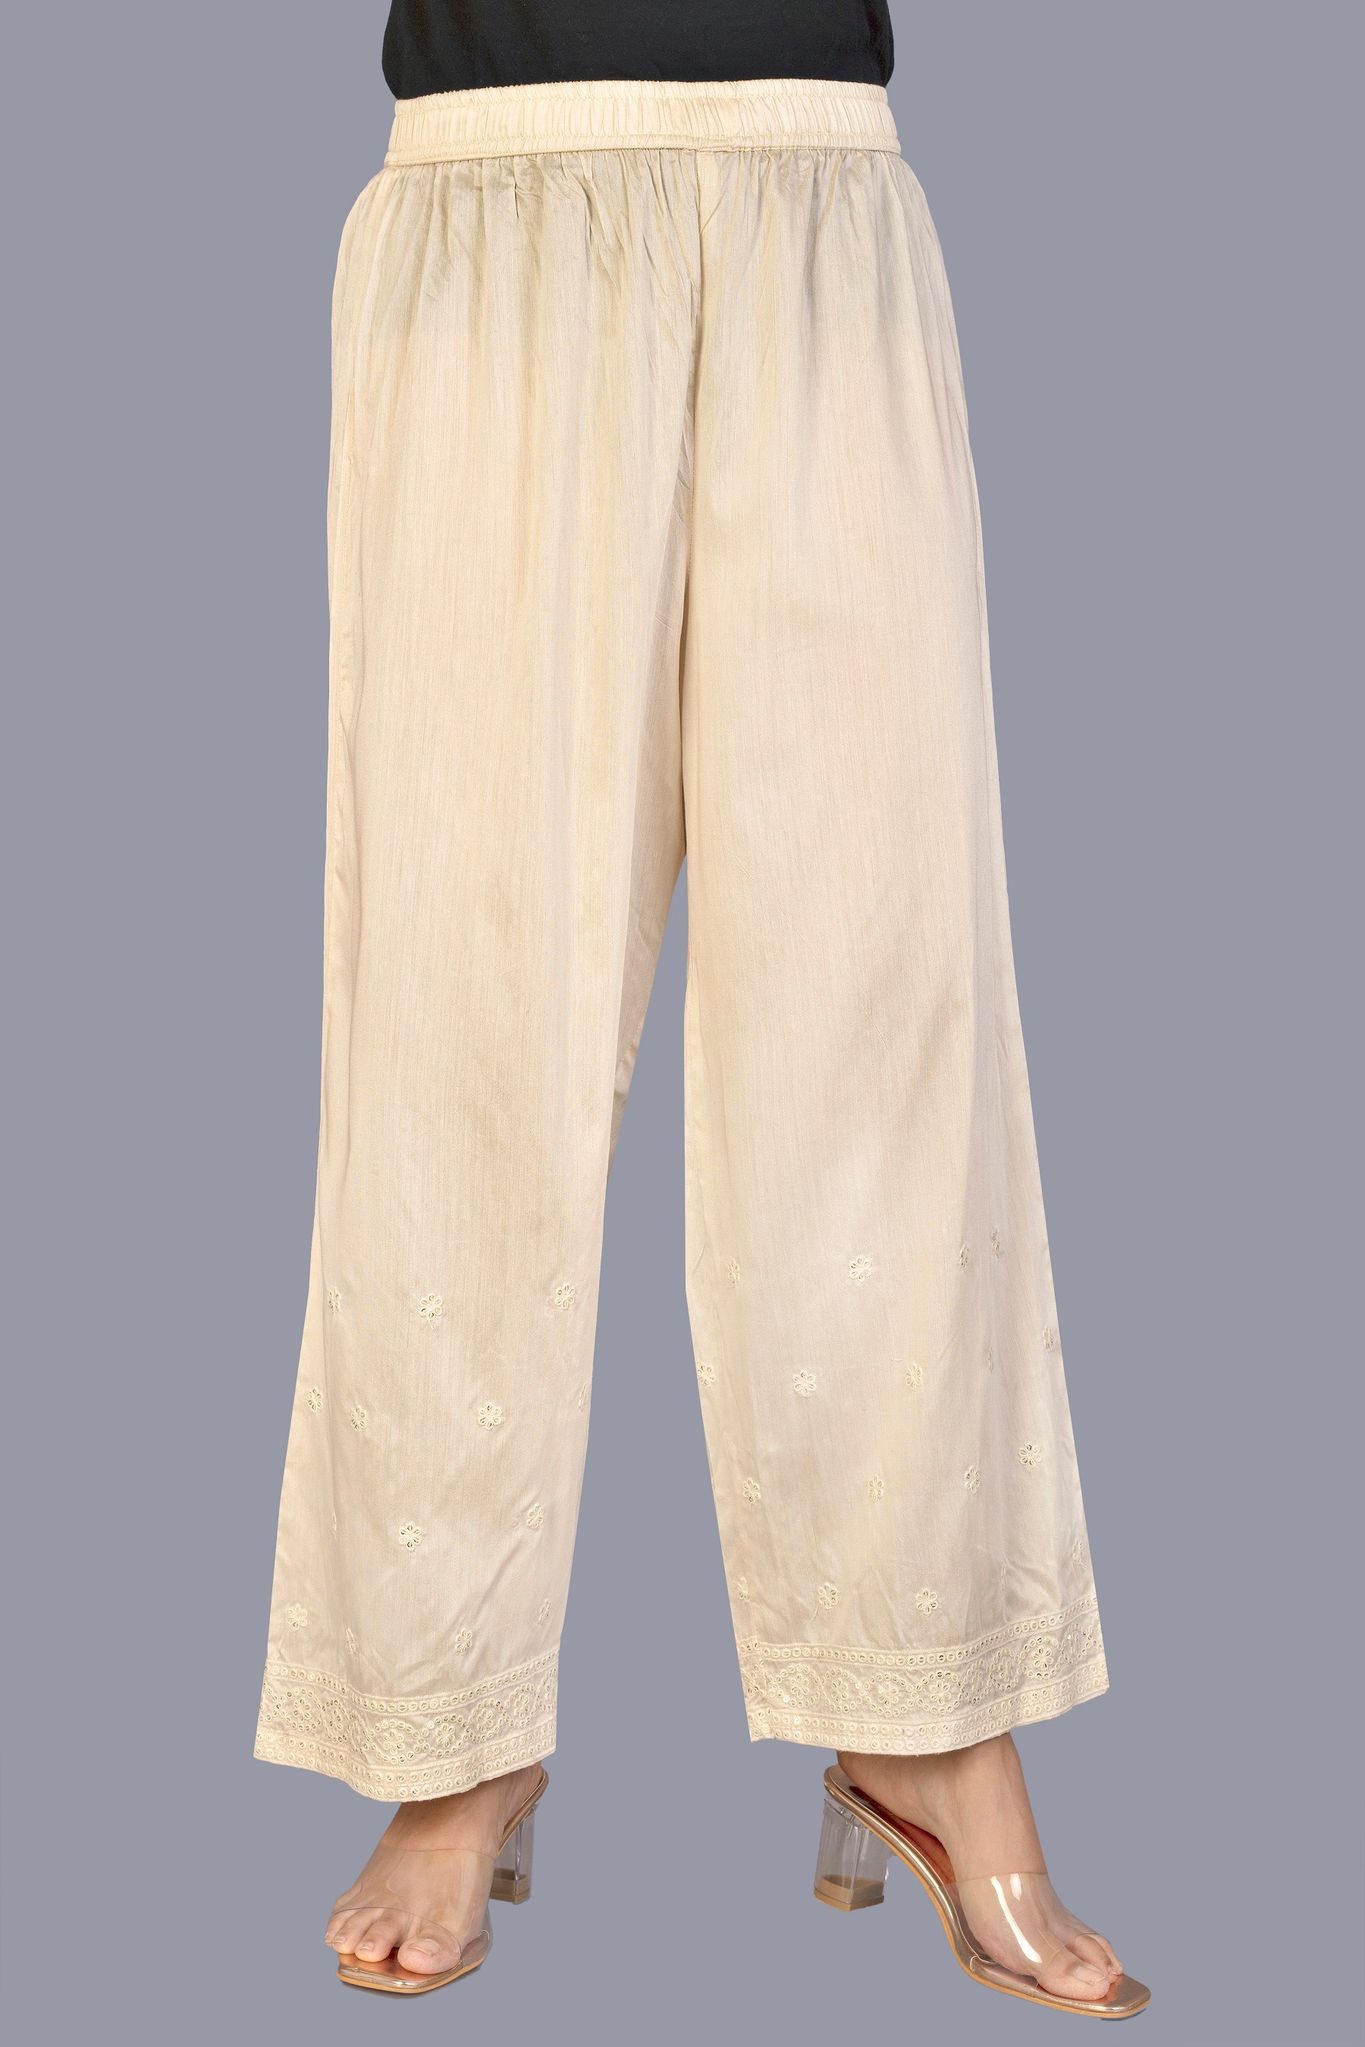 Buy Online - Embroidered Cream Cotton Palazzo 2